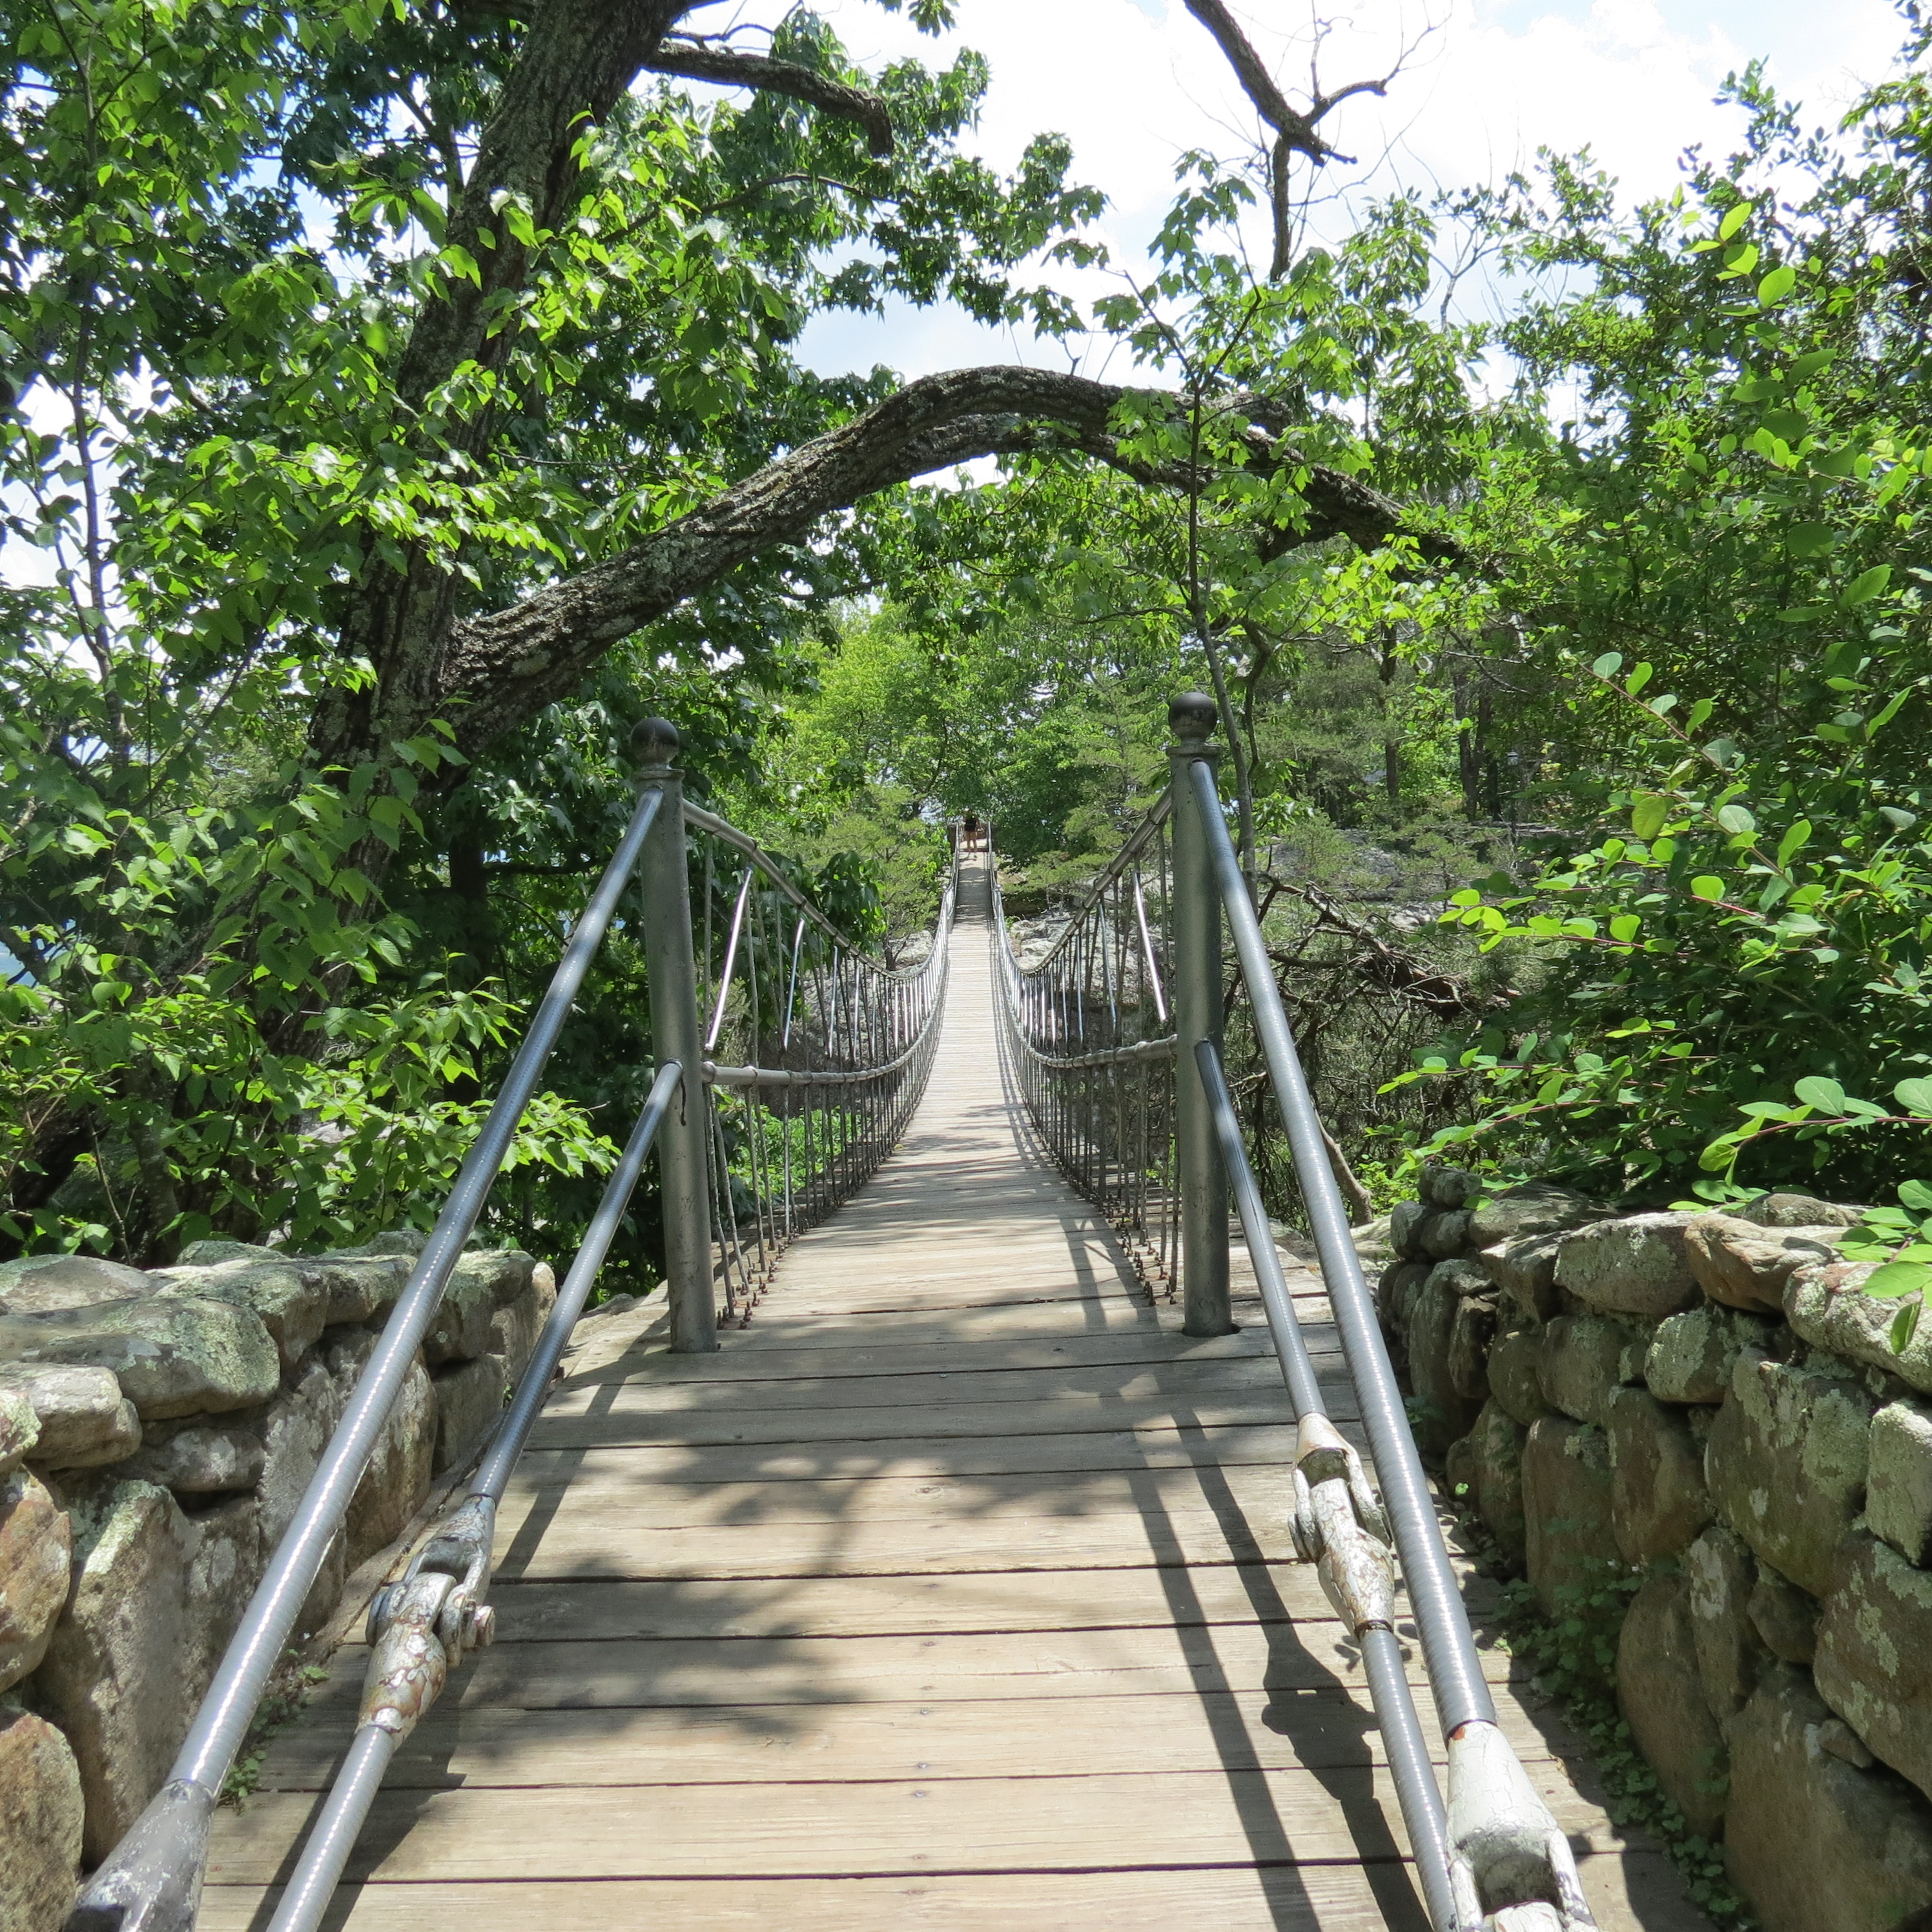 Moving Wooden Bridge at Rock City in Lookout Mountain Georgia